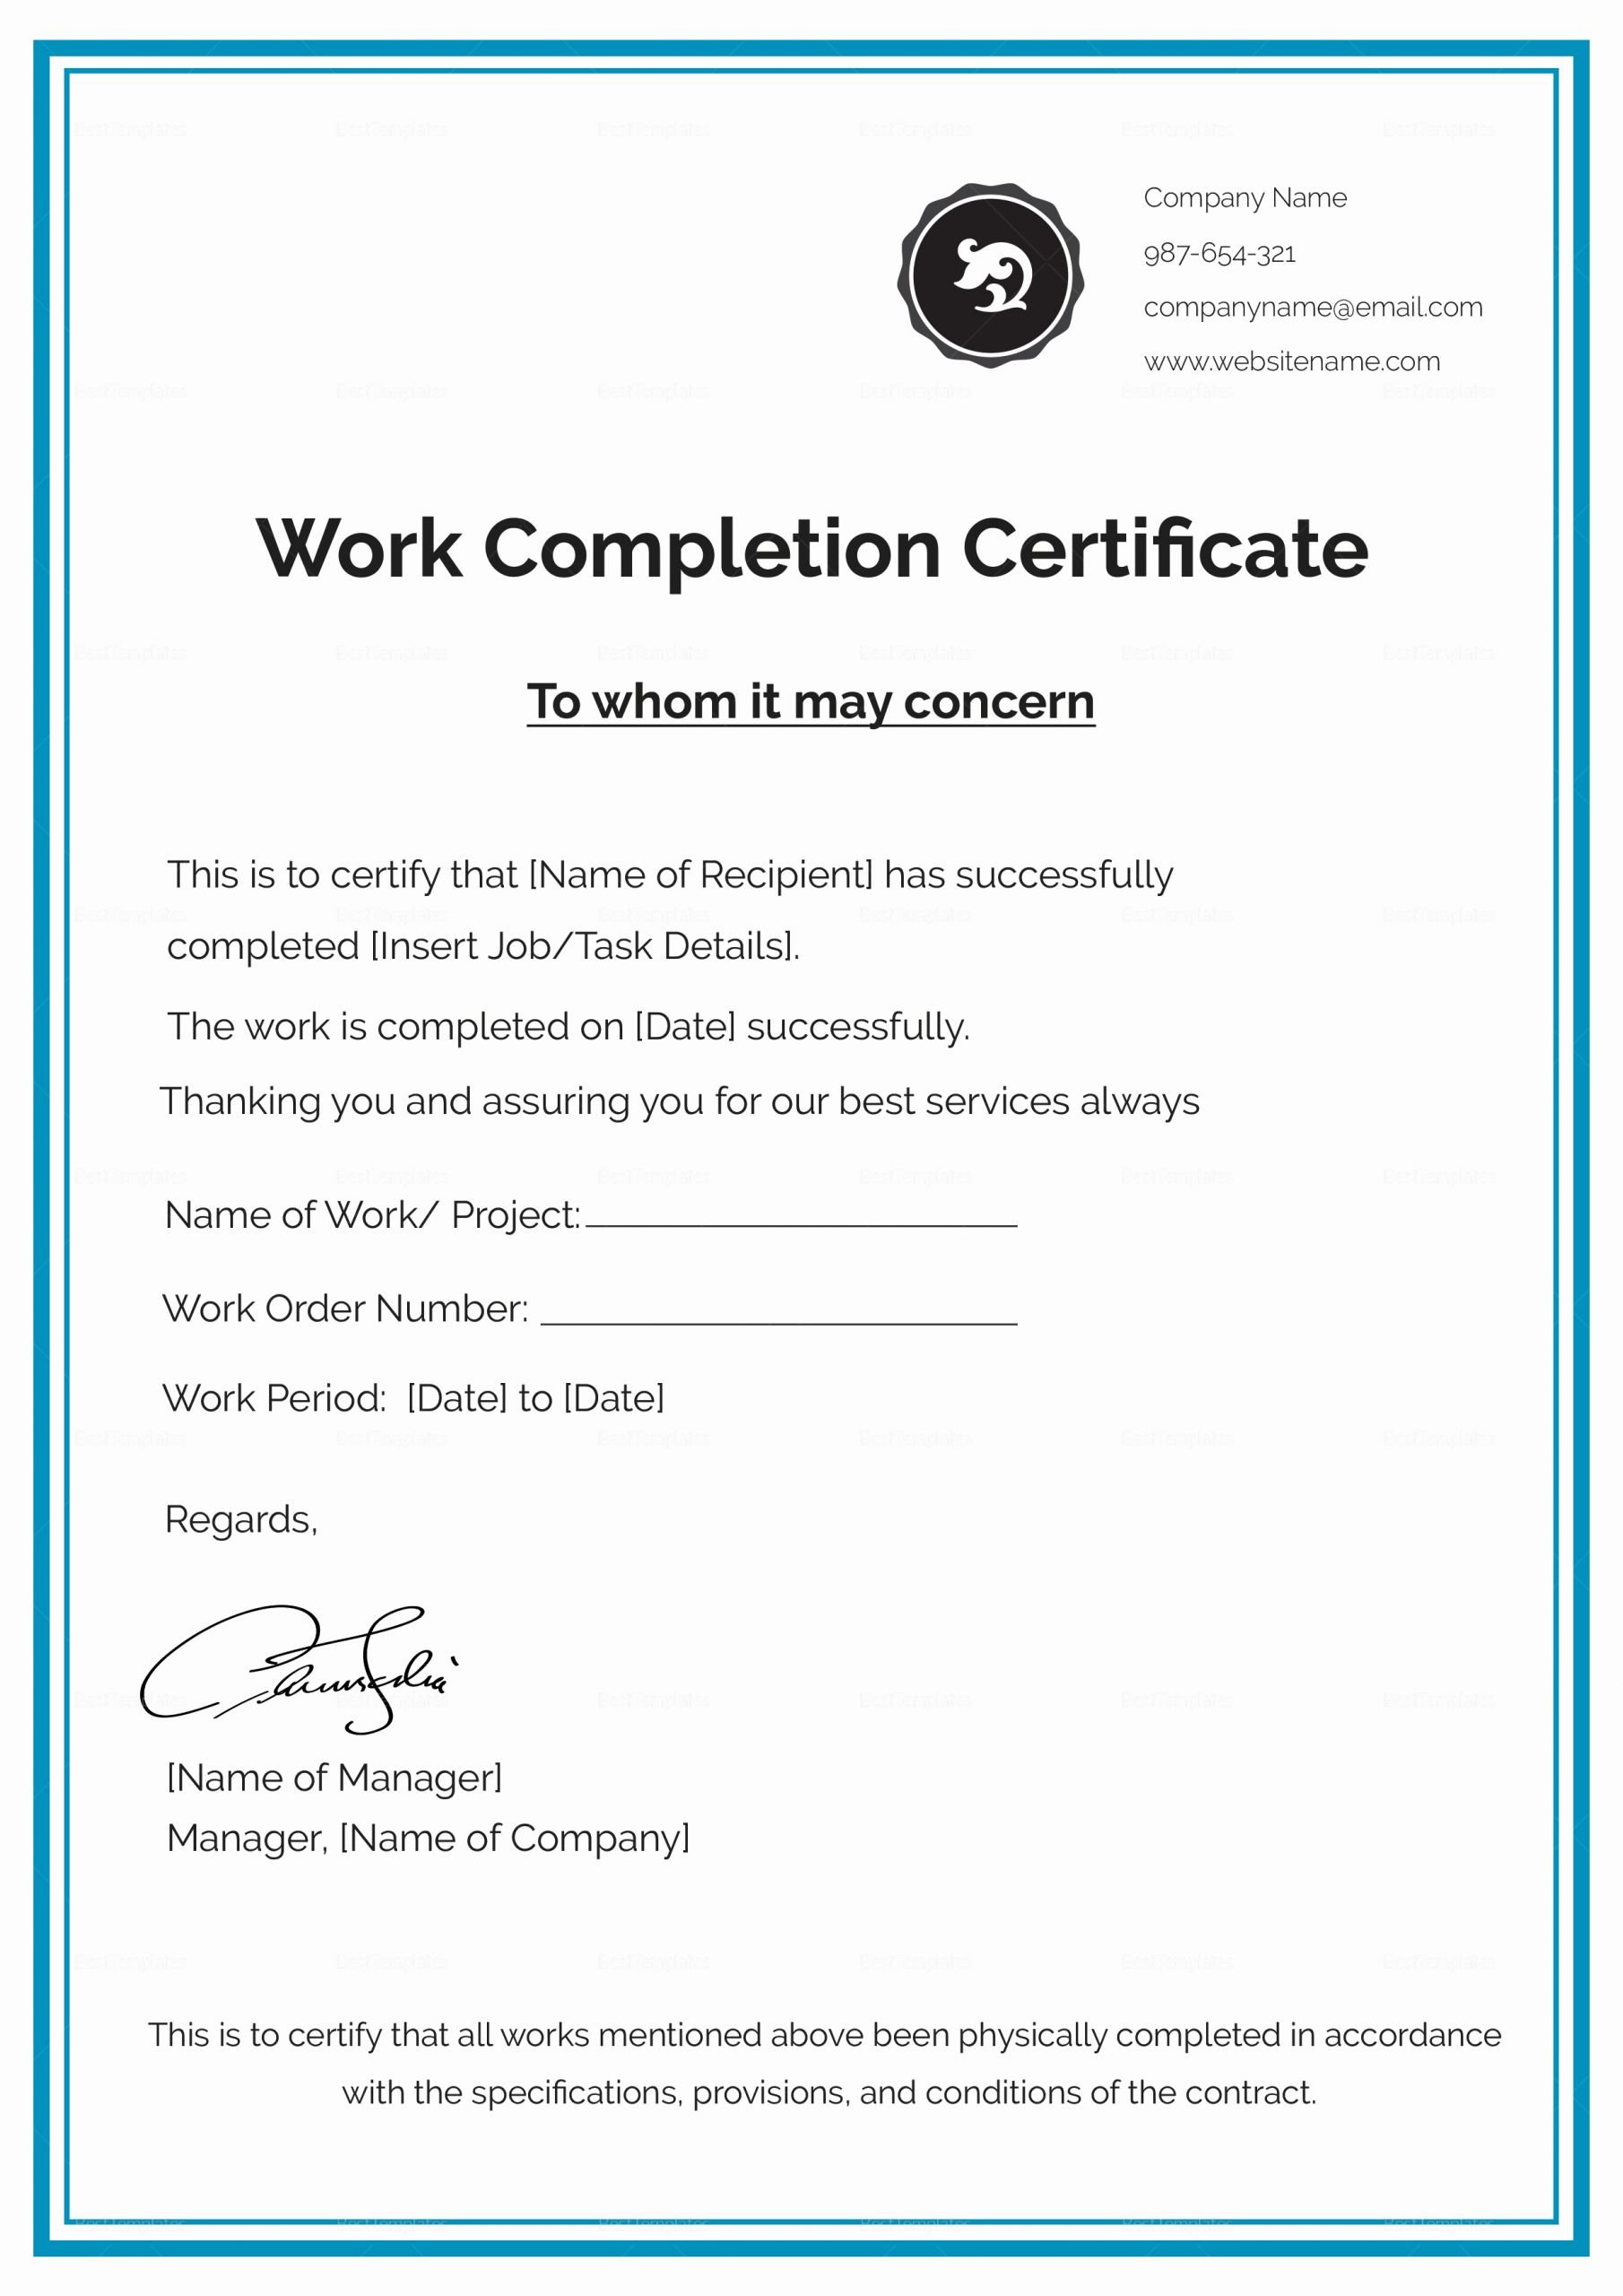 Certificate Of Completion Template Construction Unique Work Pletion Certificate Design Template In Psd Word